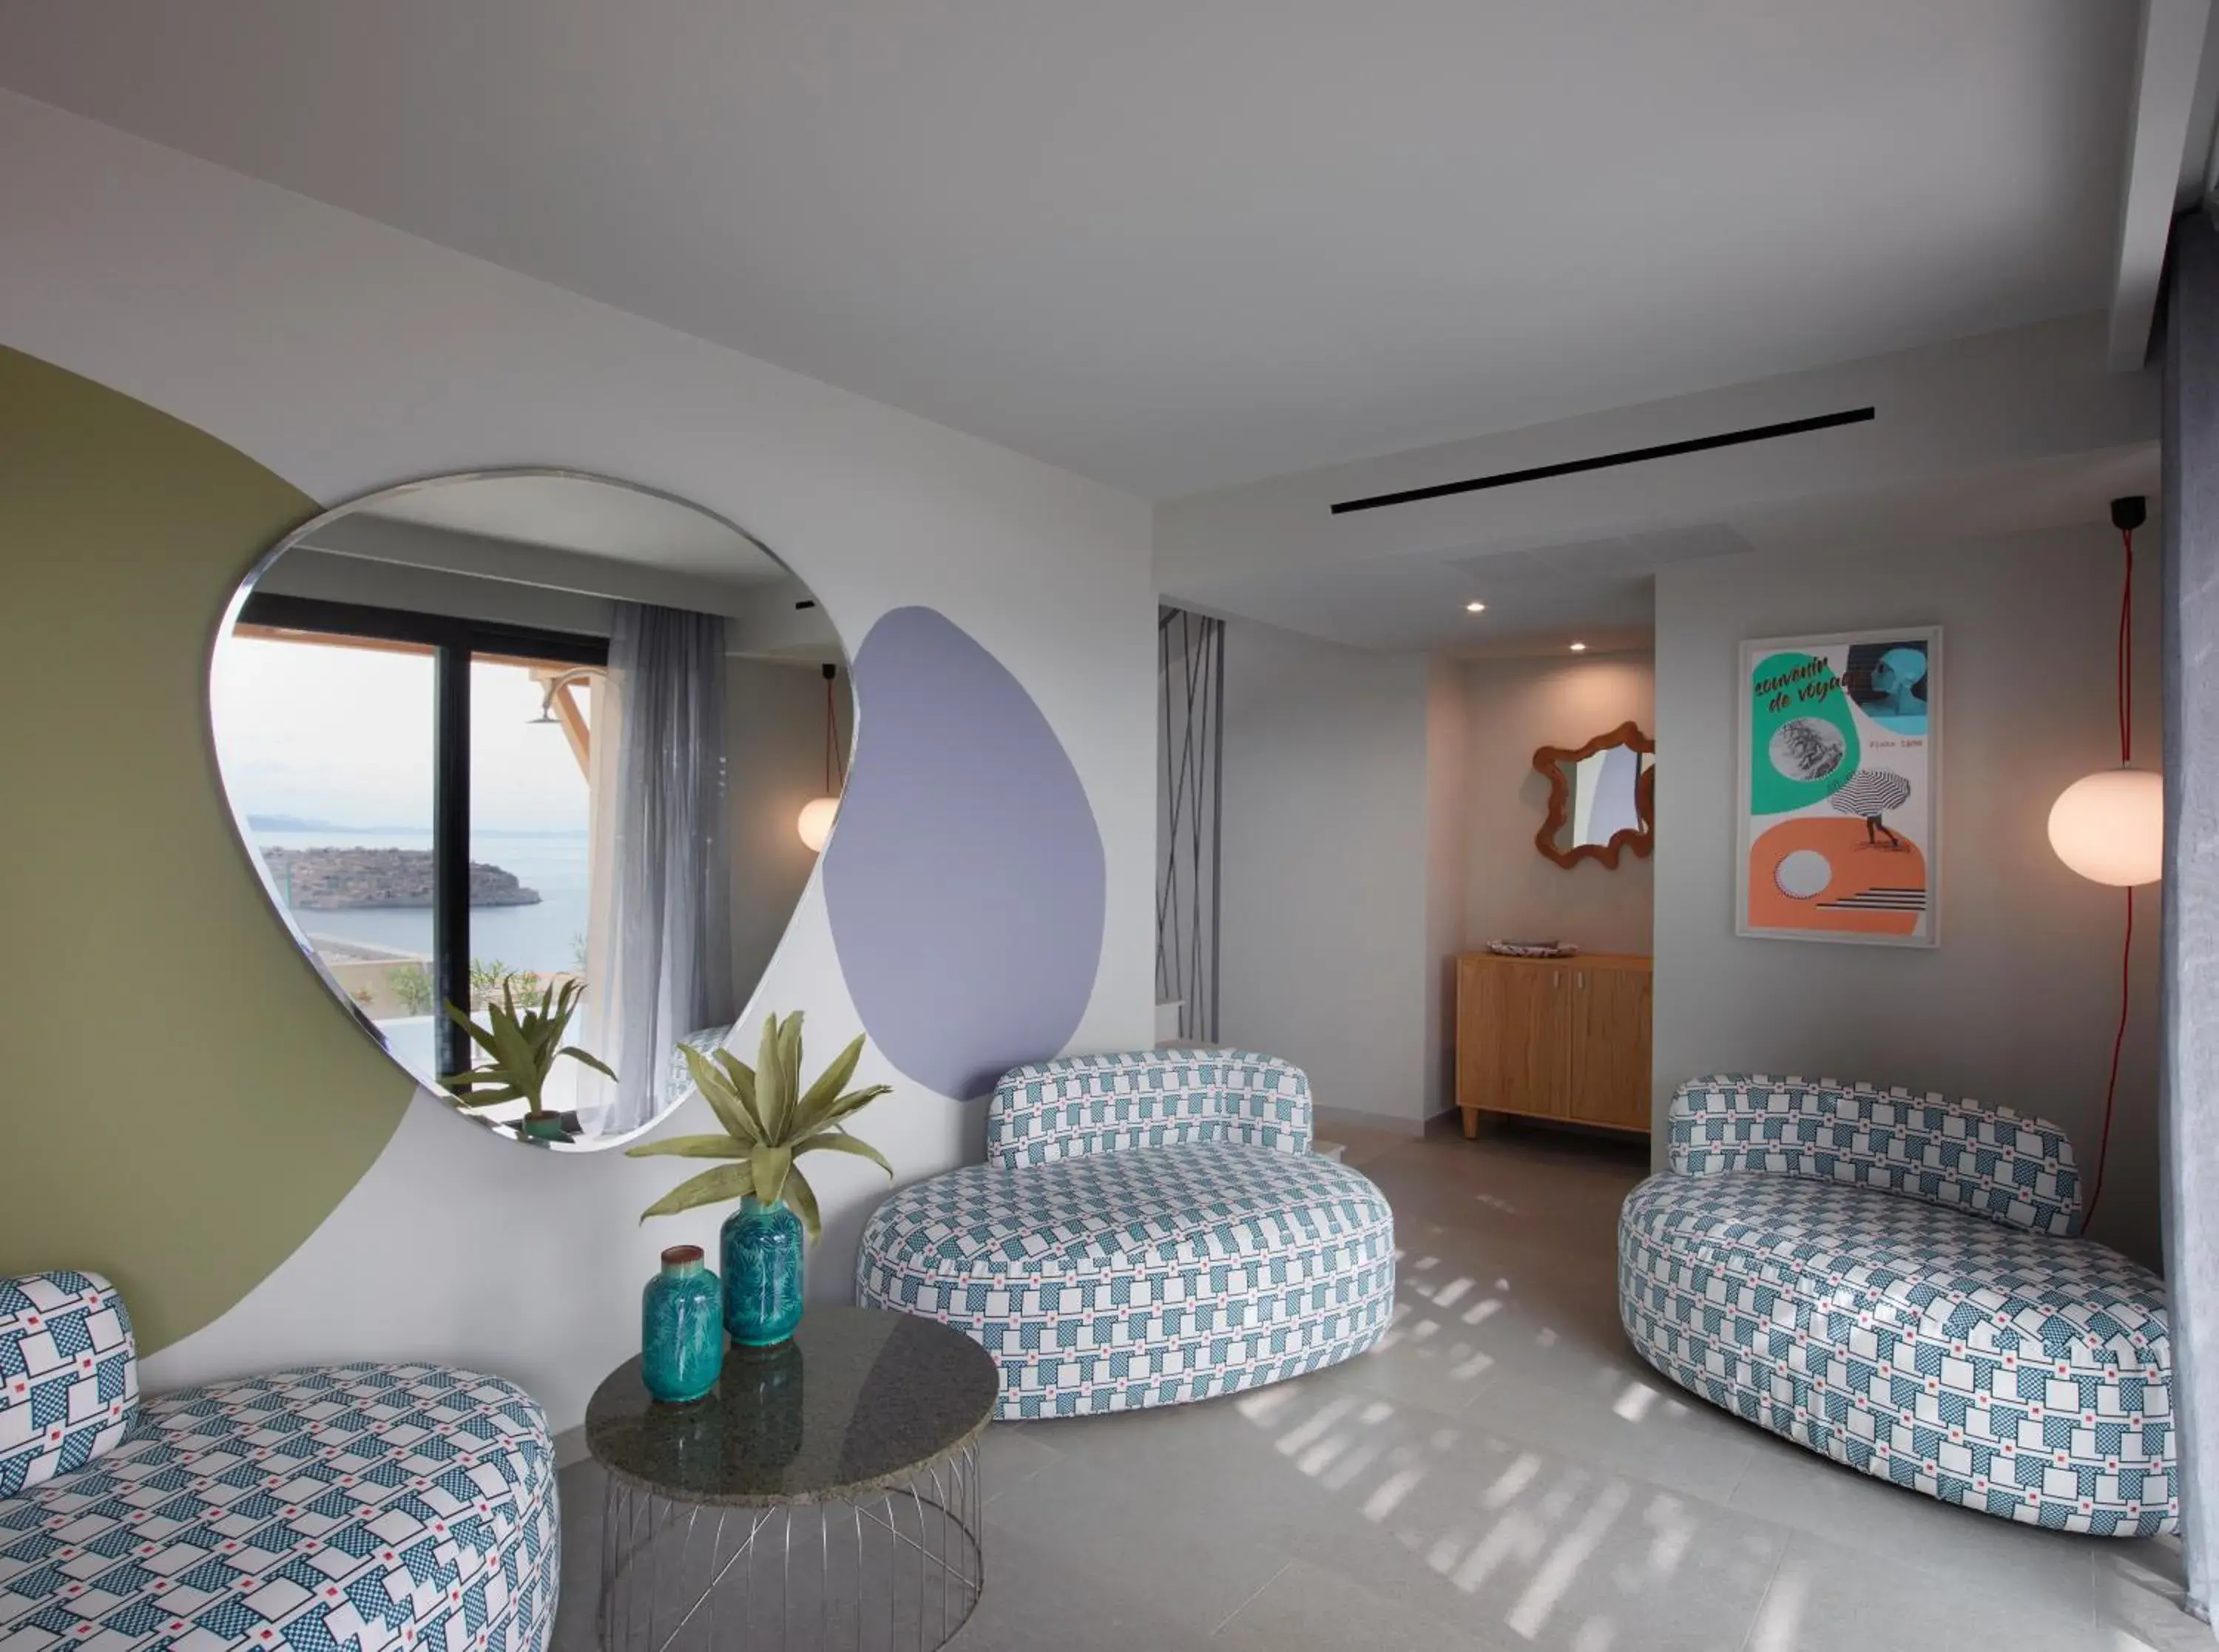 Living room, Room Photo in Cayo Exclusive Resort & Spa